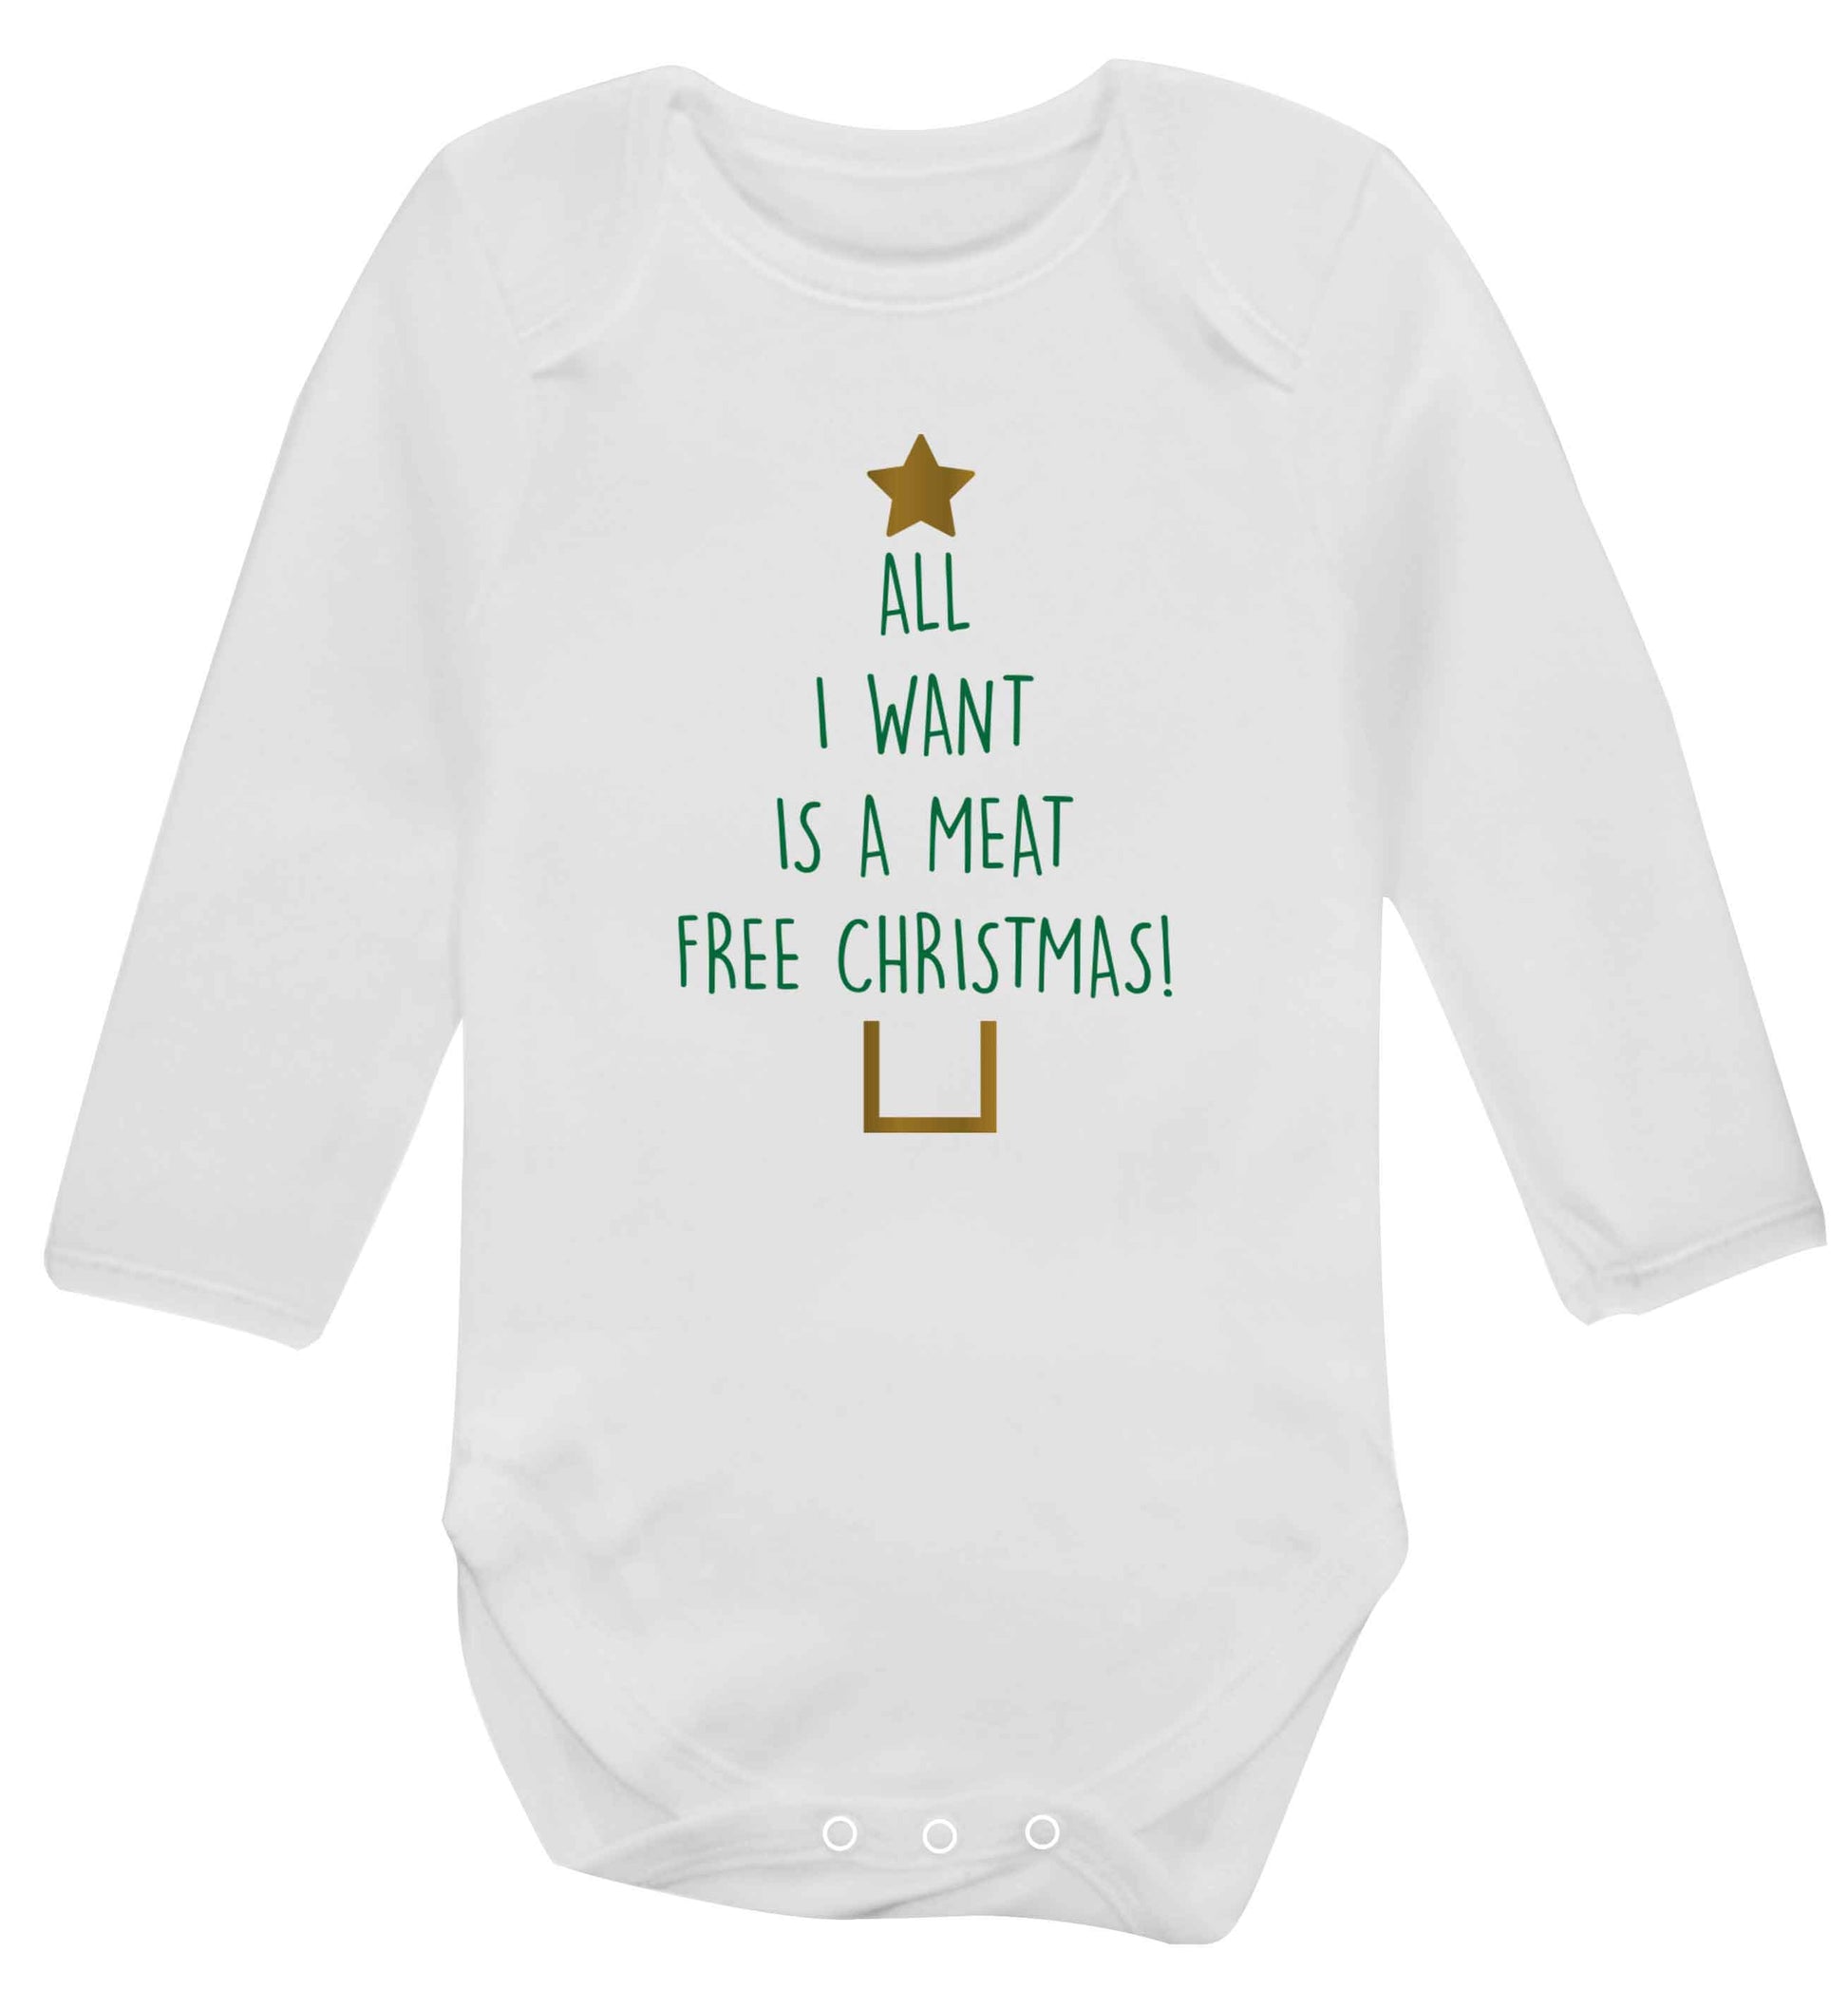 All I want is a meat free Christmas Baby Vest long sleeved white 6-12 months